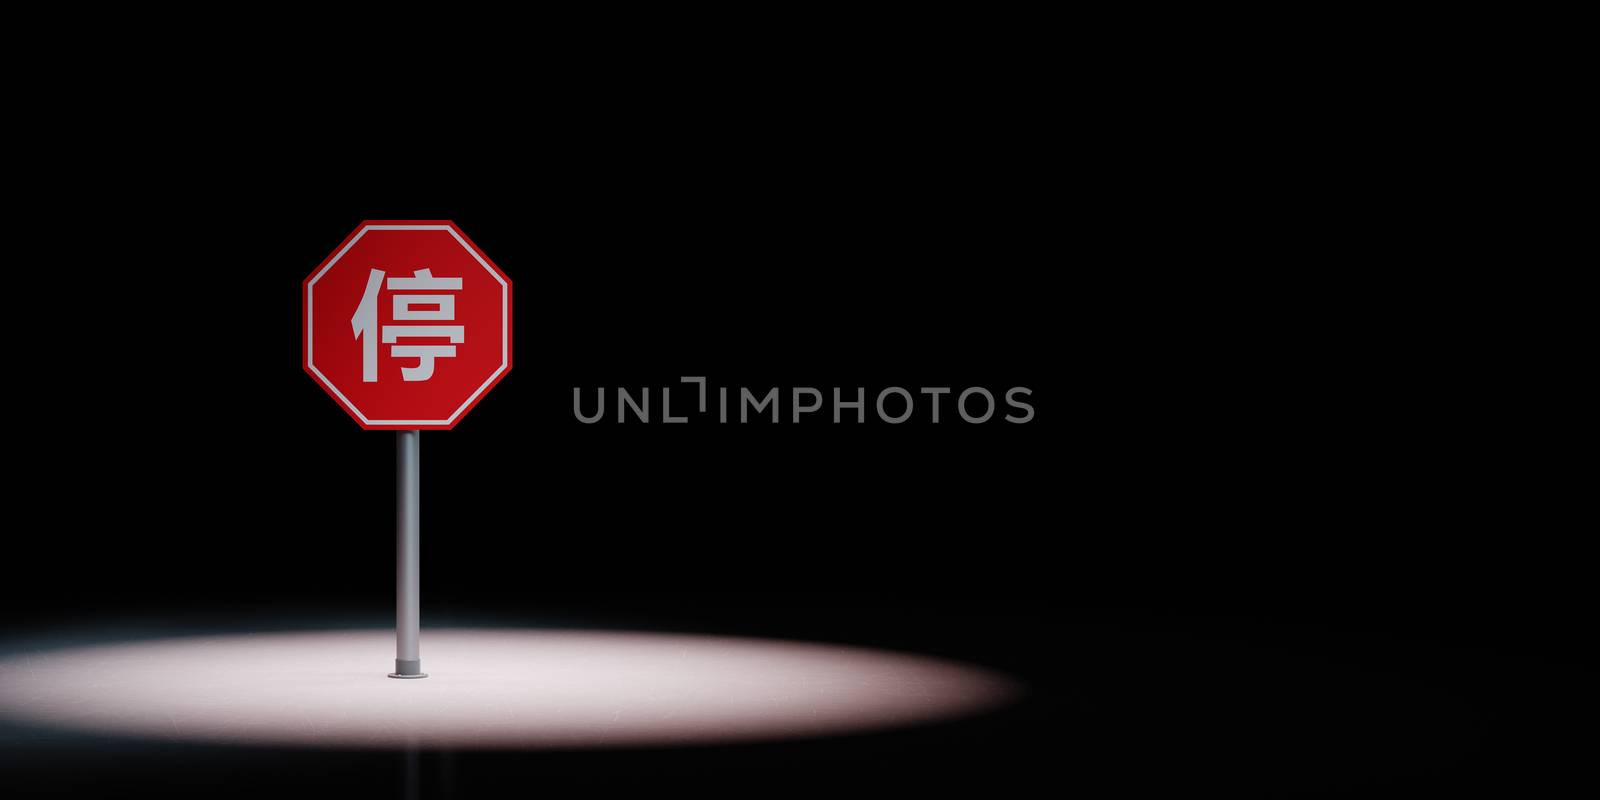 Chinese Stop Road Sign Spotlighted on Black Background with Copy Space 3D Illustration